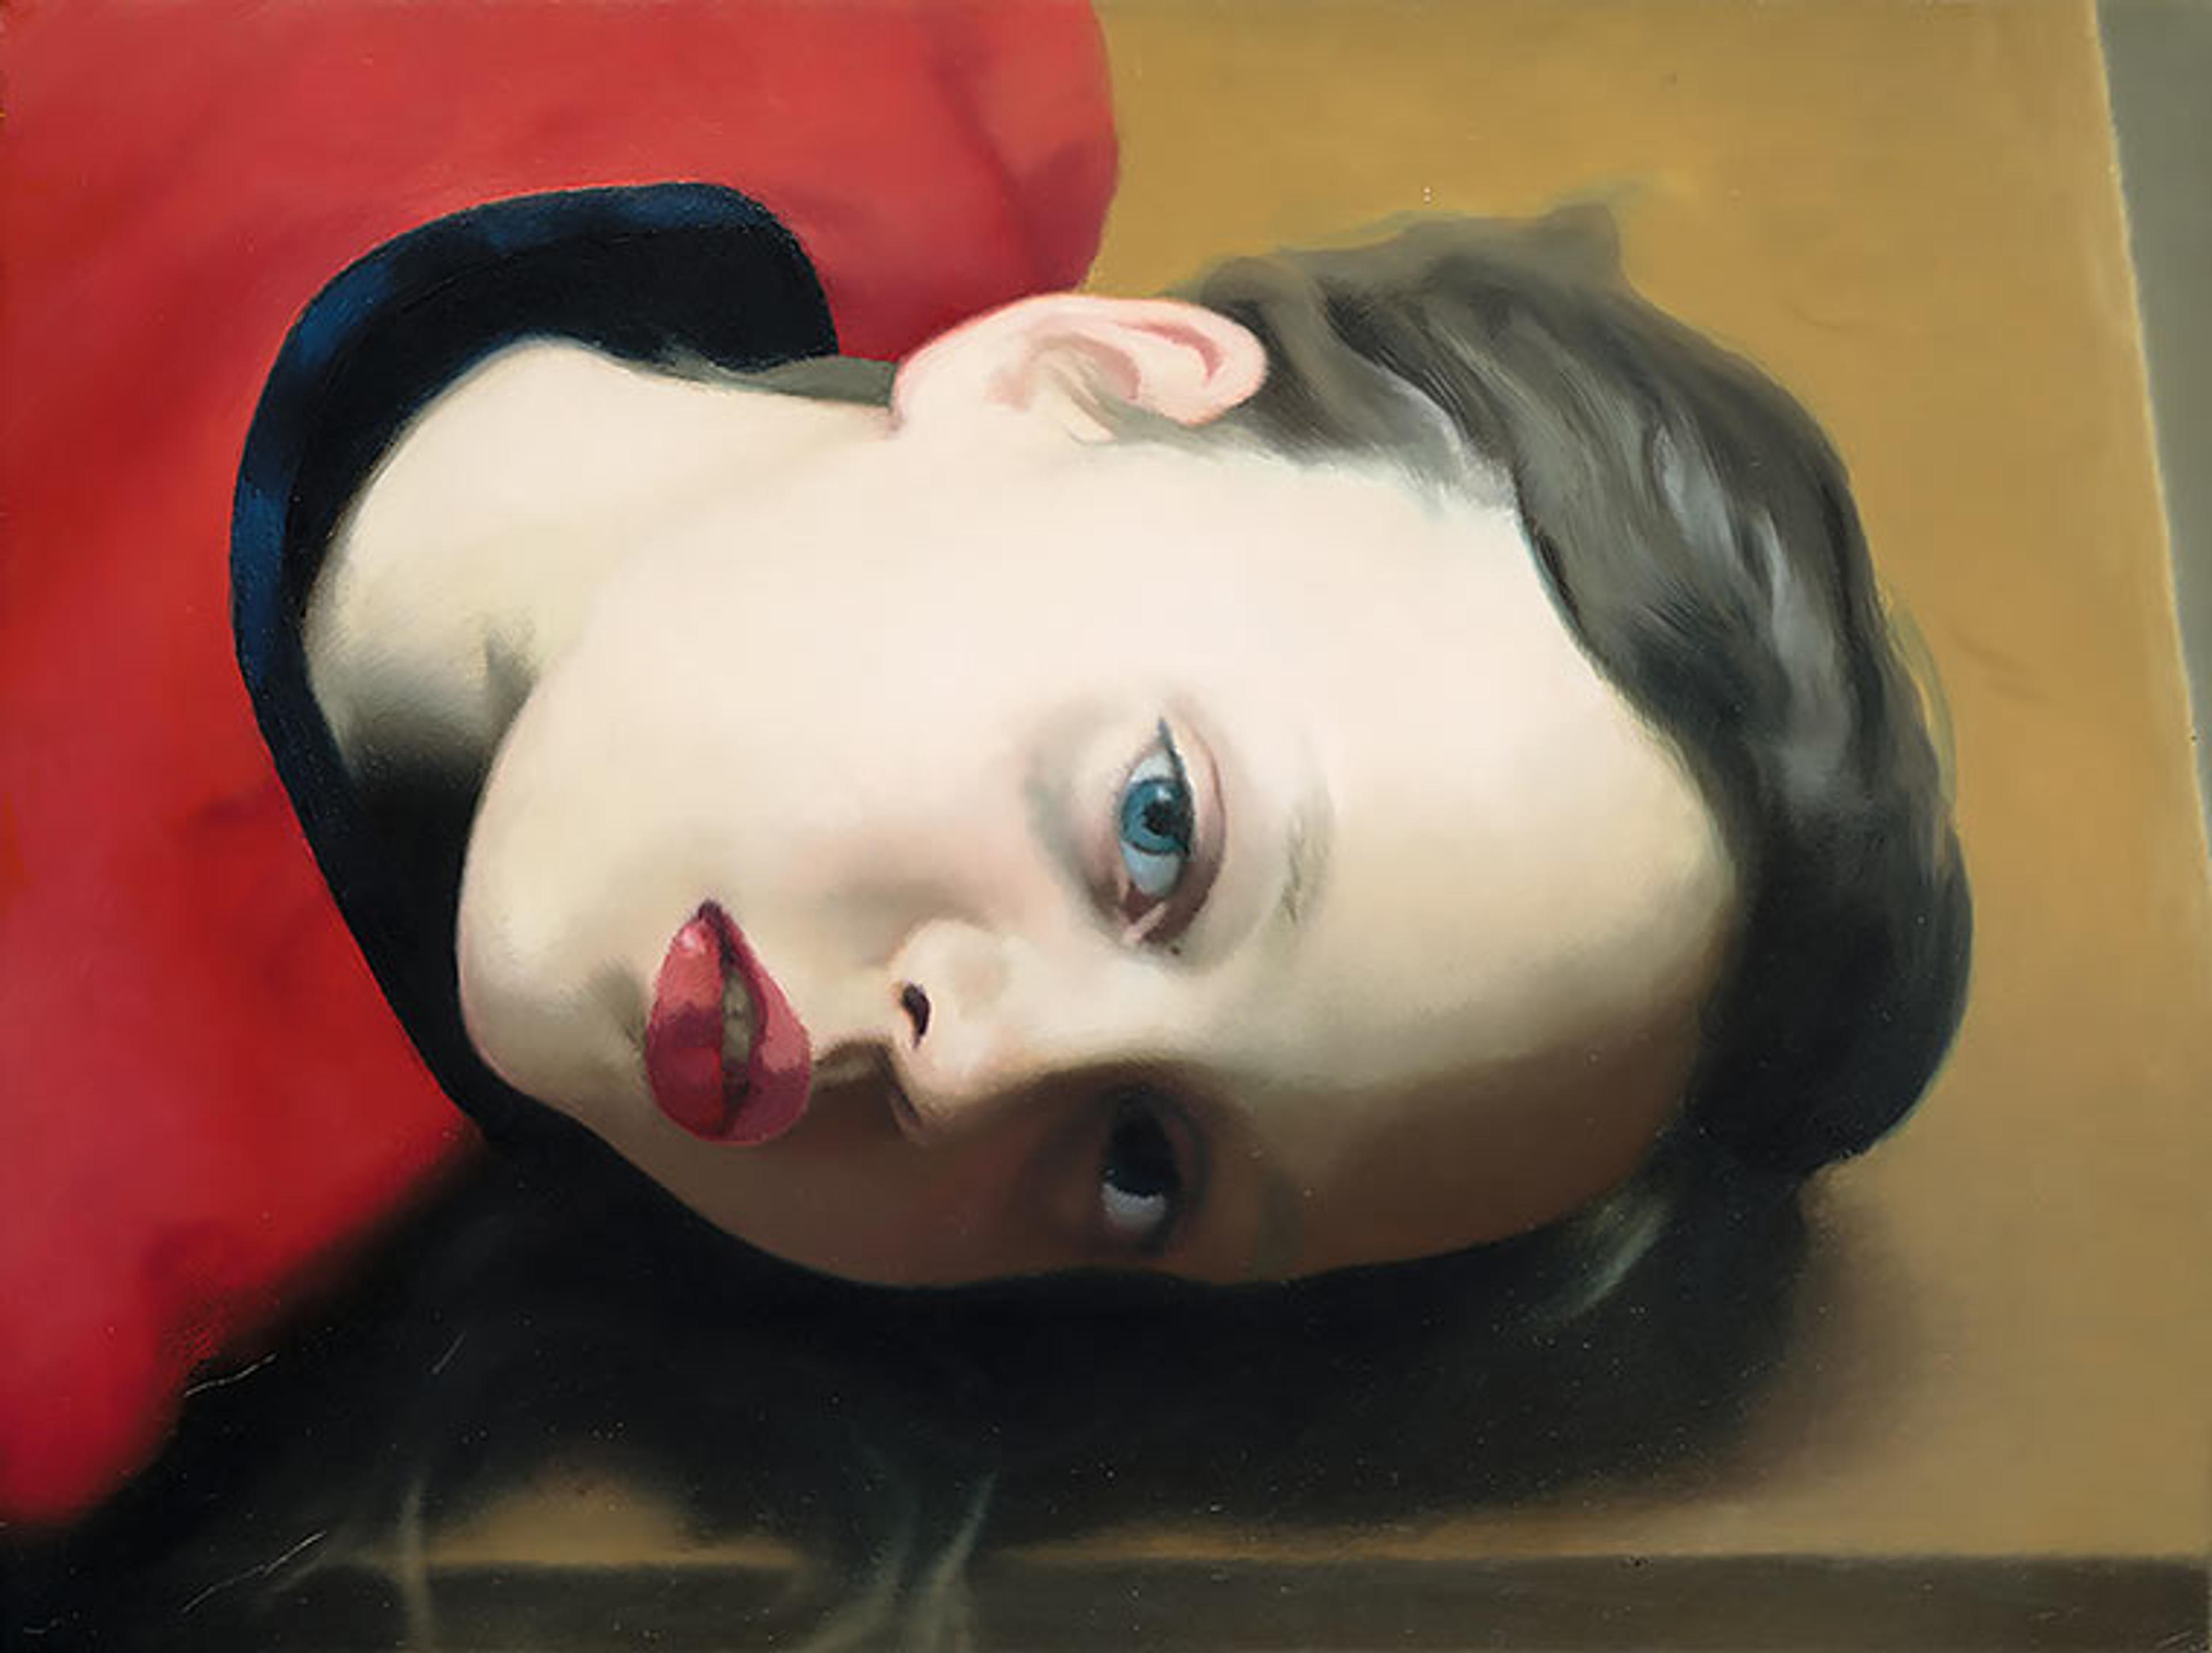 An oil painting of the face of a young girl who is wearing a red t-shirt.